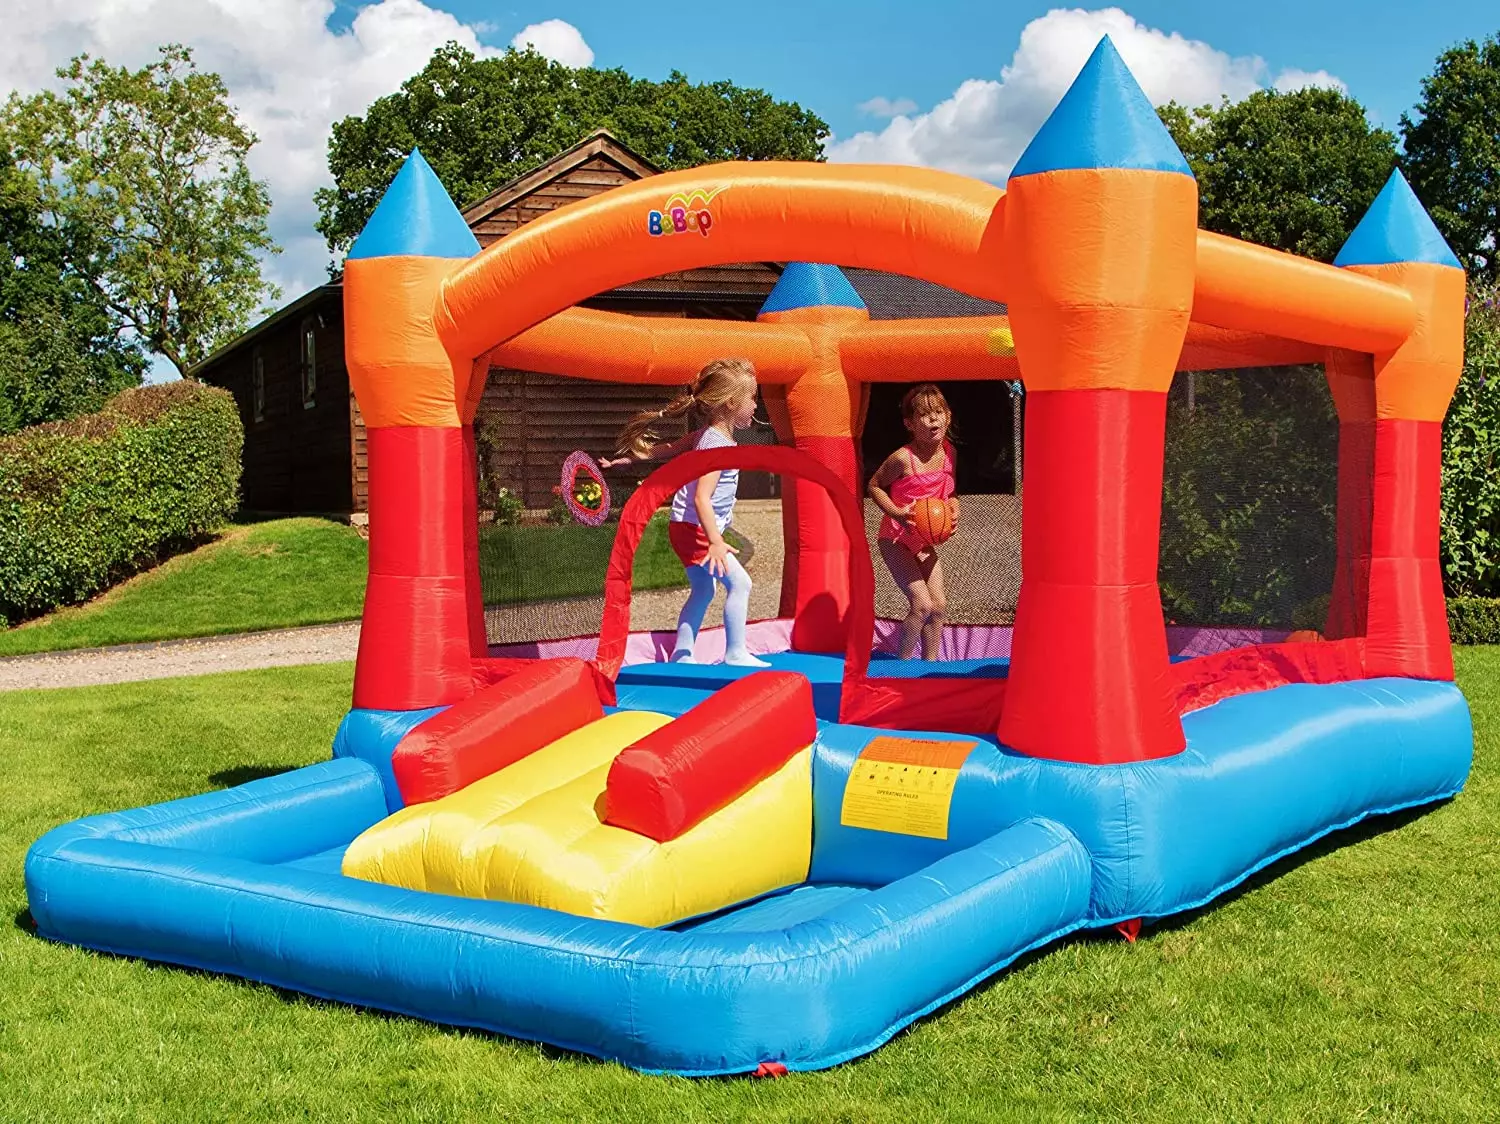 Amazon offer a range of bouncy castles suitable for kids too! (